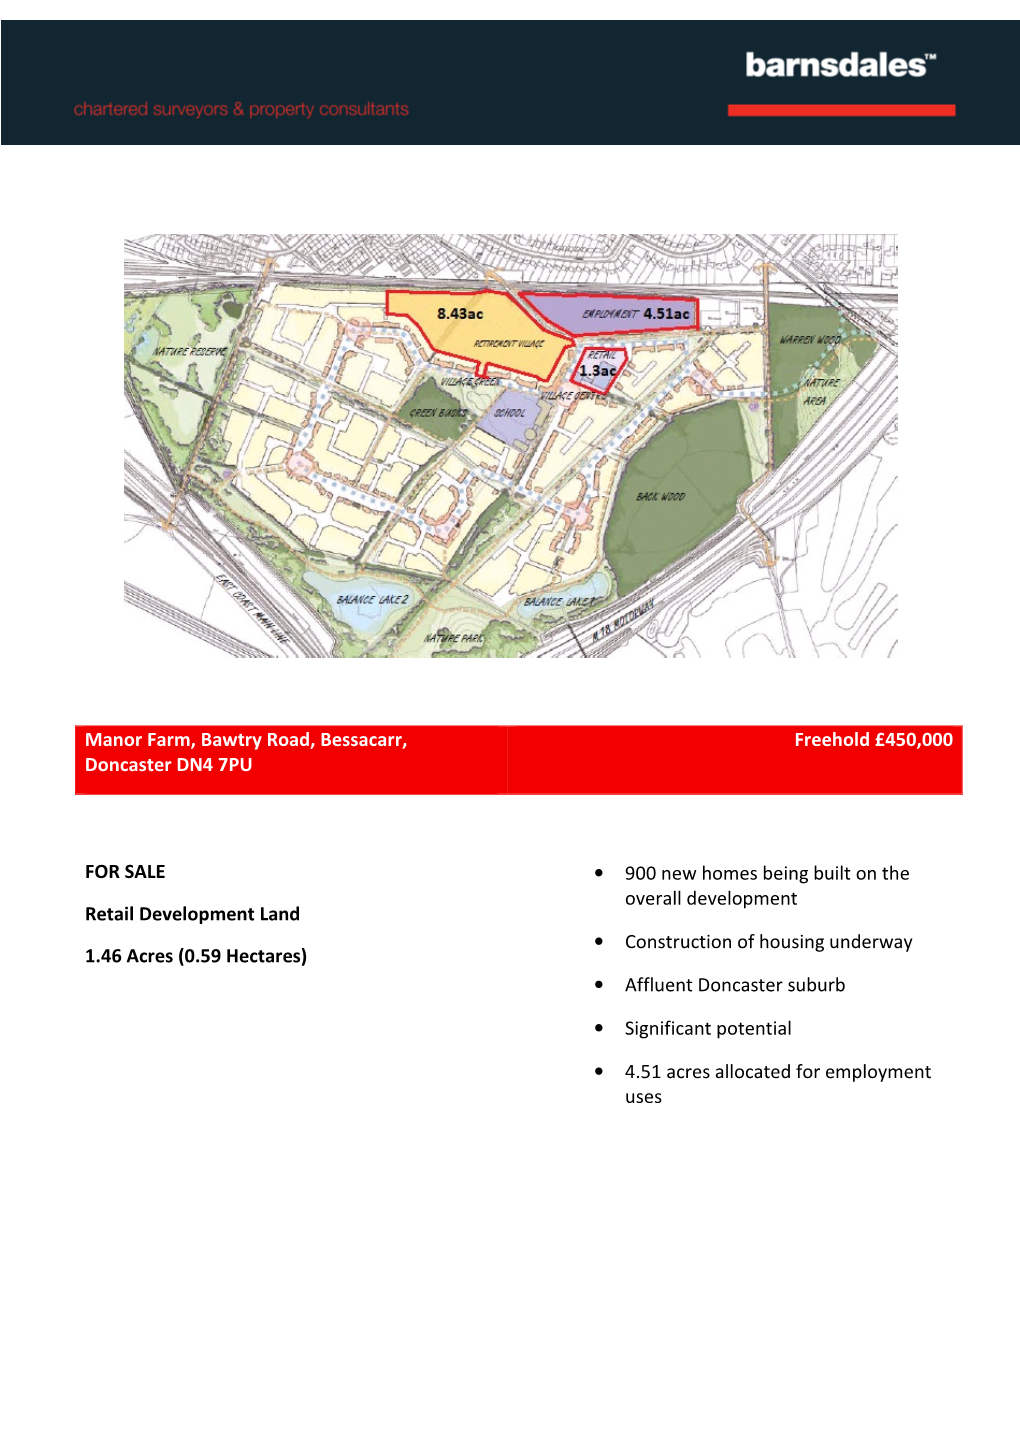 Manor Farm, Bawtry Road, Bessacarr, Doncaster DN4 7PU Freehold £450000 for SALE Retail Development Land 1.46 Acres